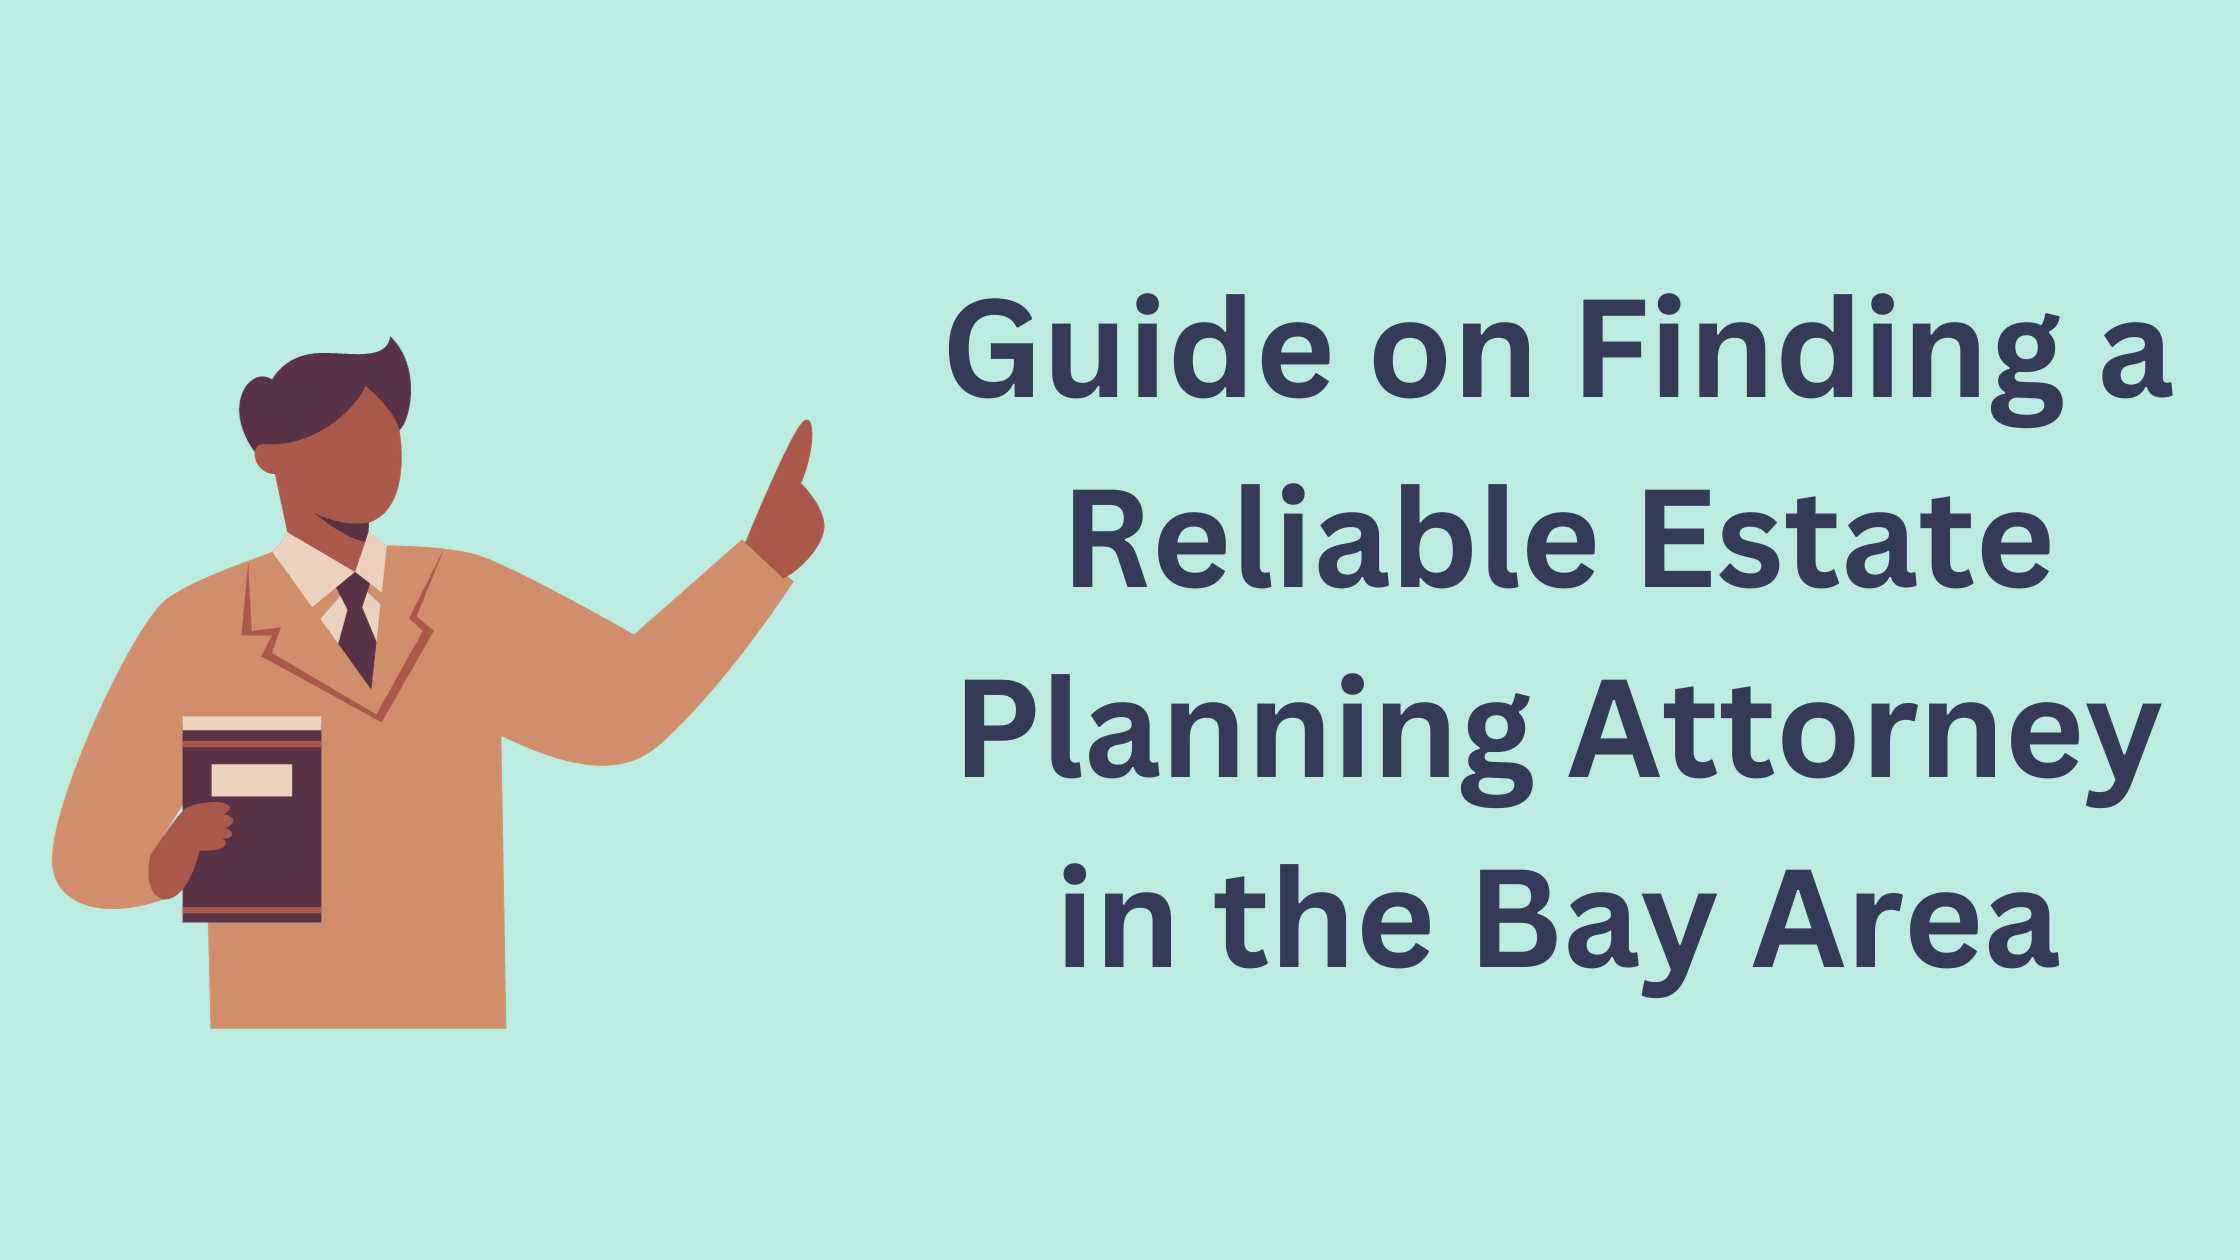 Guide on Finding a Reliable Estate Planning Attorney in the Bay Area